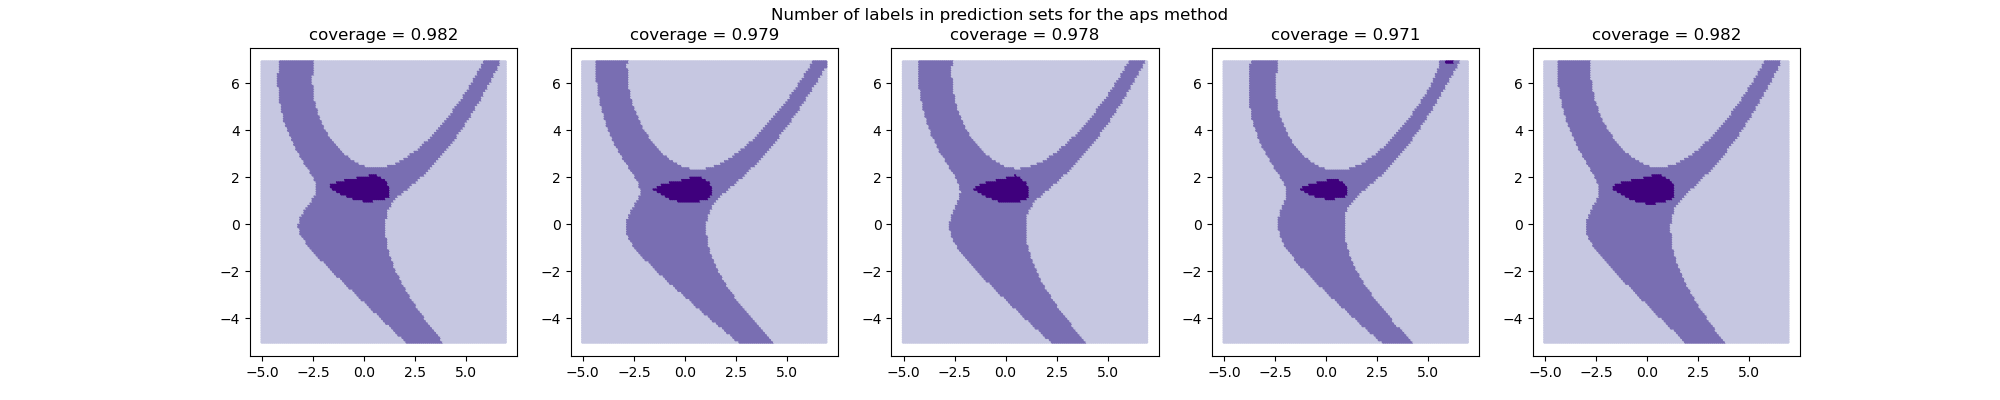 Number of labels in prediction sets for the aps method, coverage = 0.982, coverage = 0.979, coverage = 0.978, coverage = 0.971, coverage = 0.982